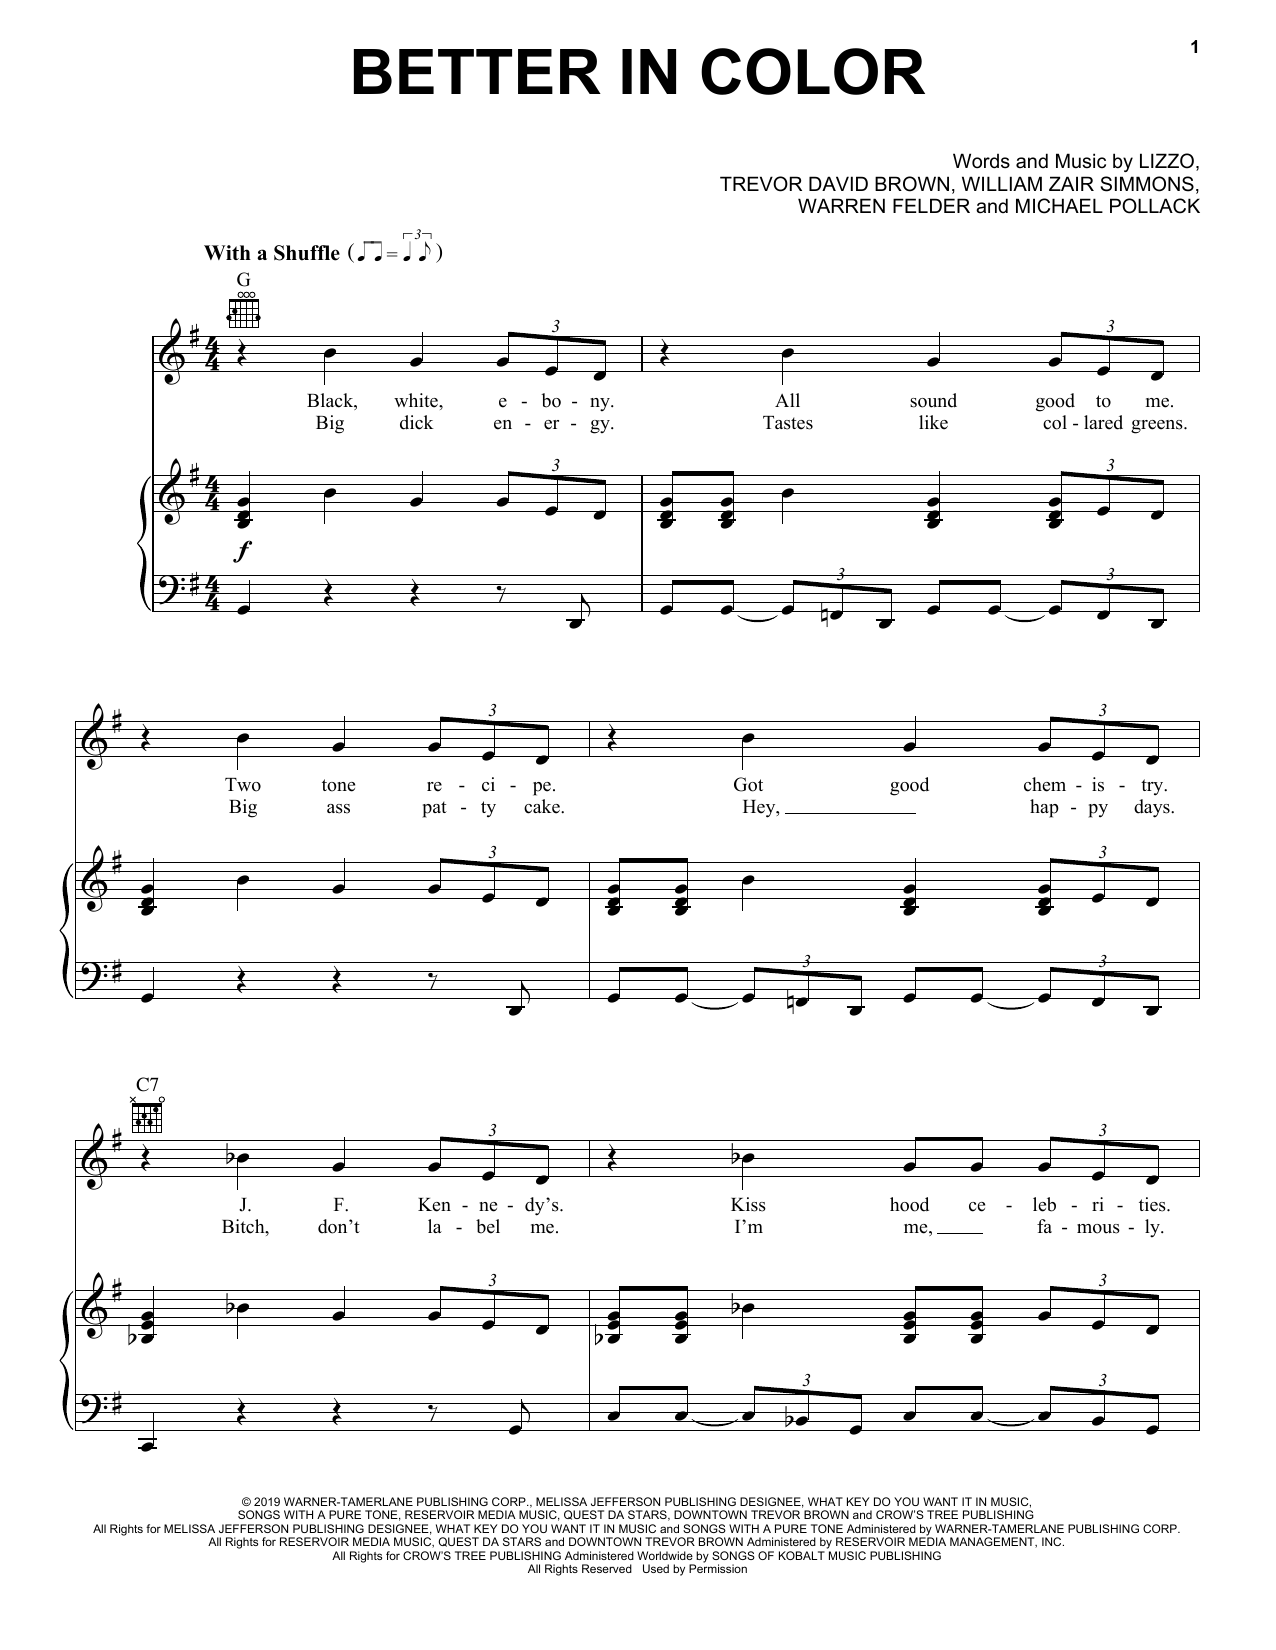 Download Lizzo Better In Color Sheet Music